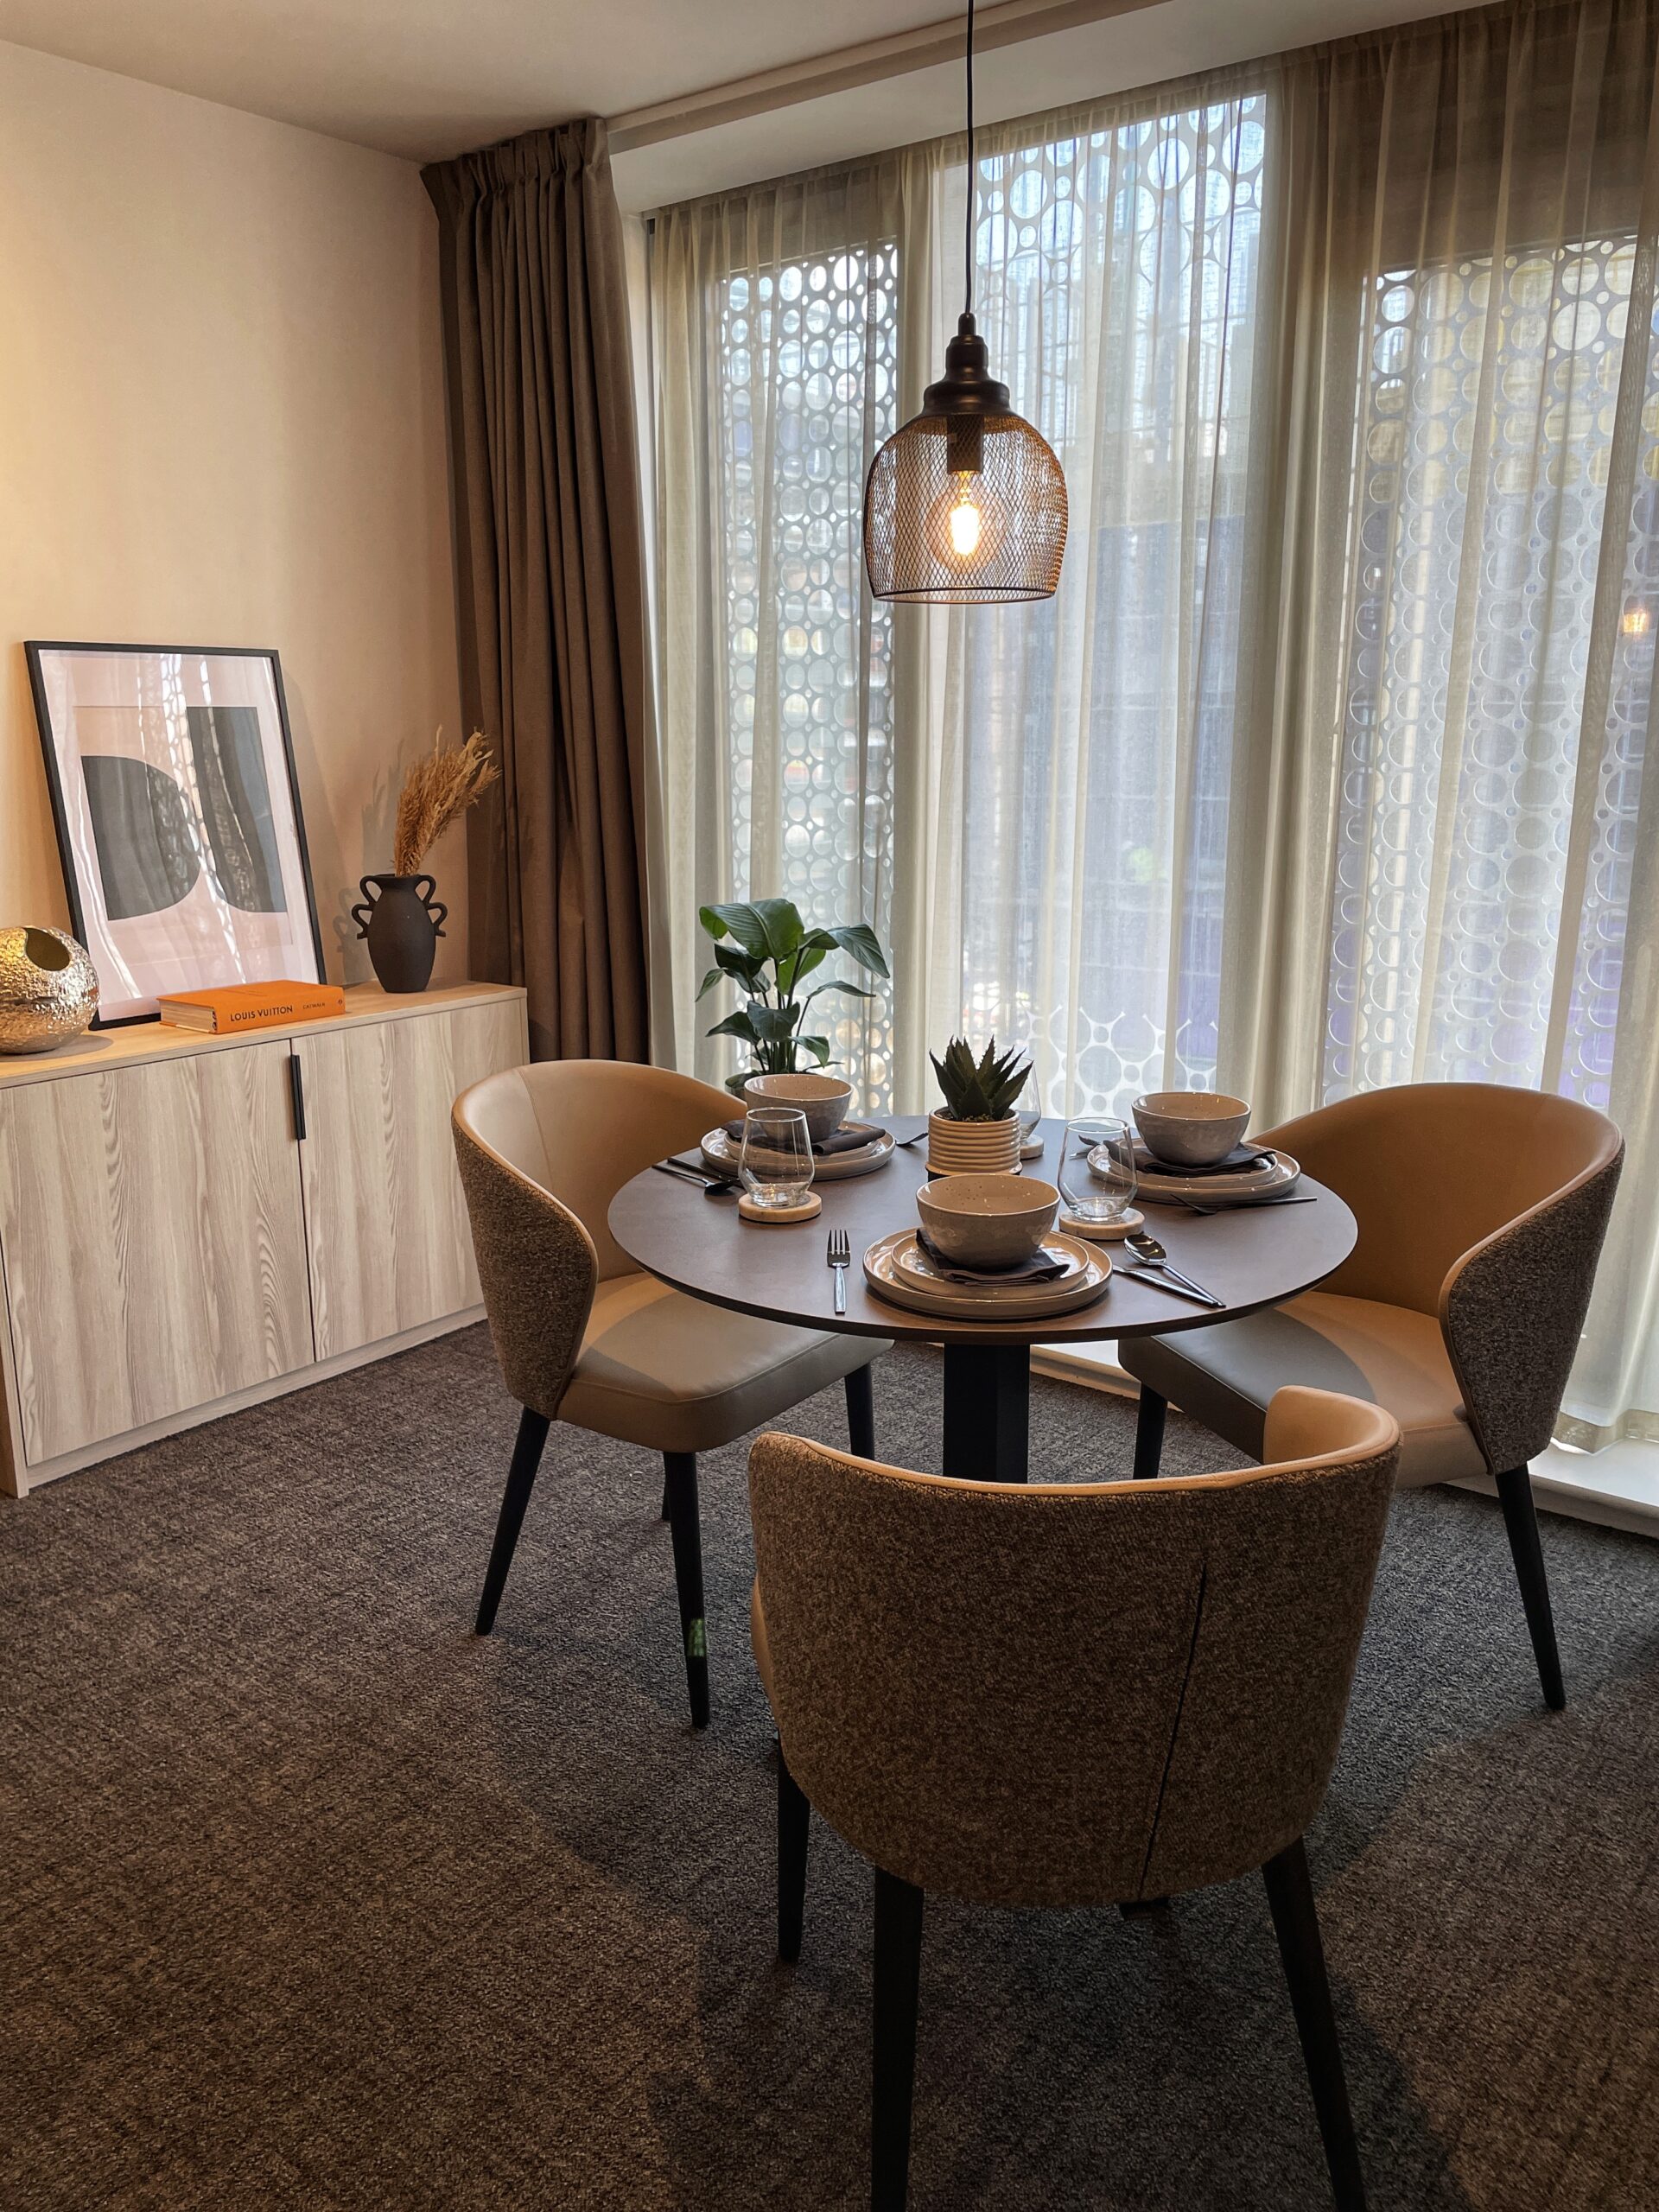 Co-living shared apartments at Square Gardens